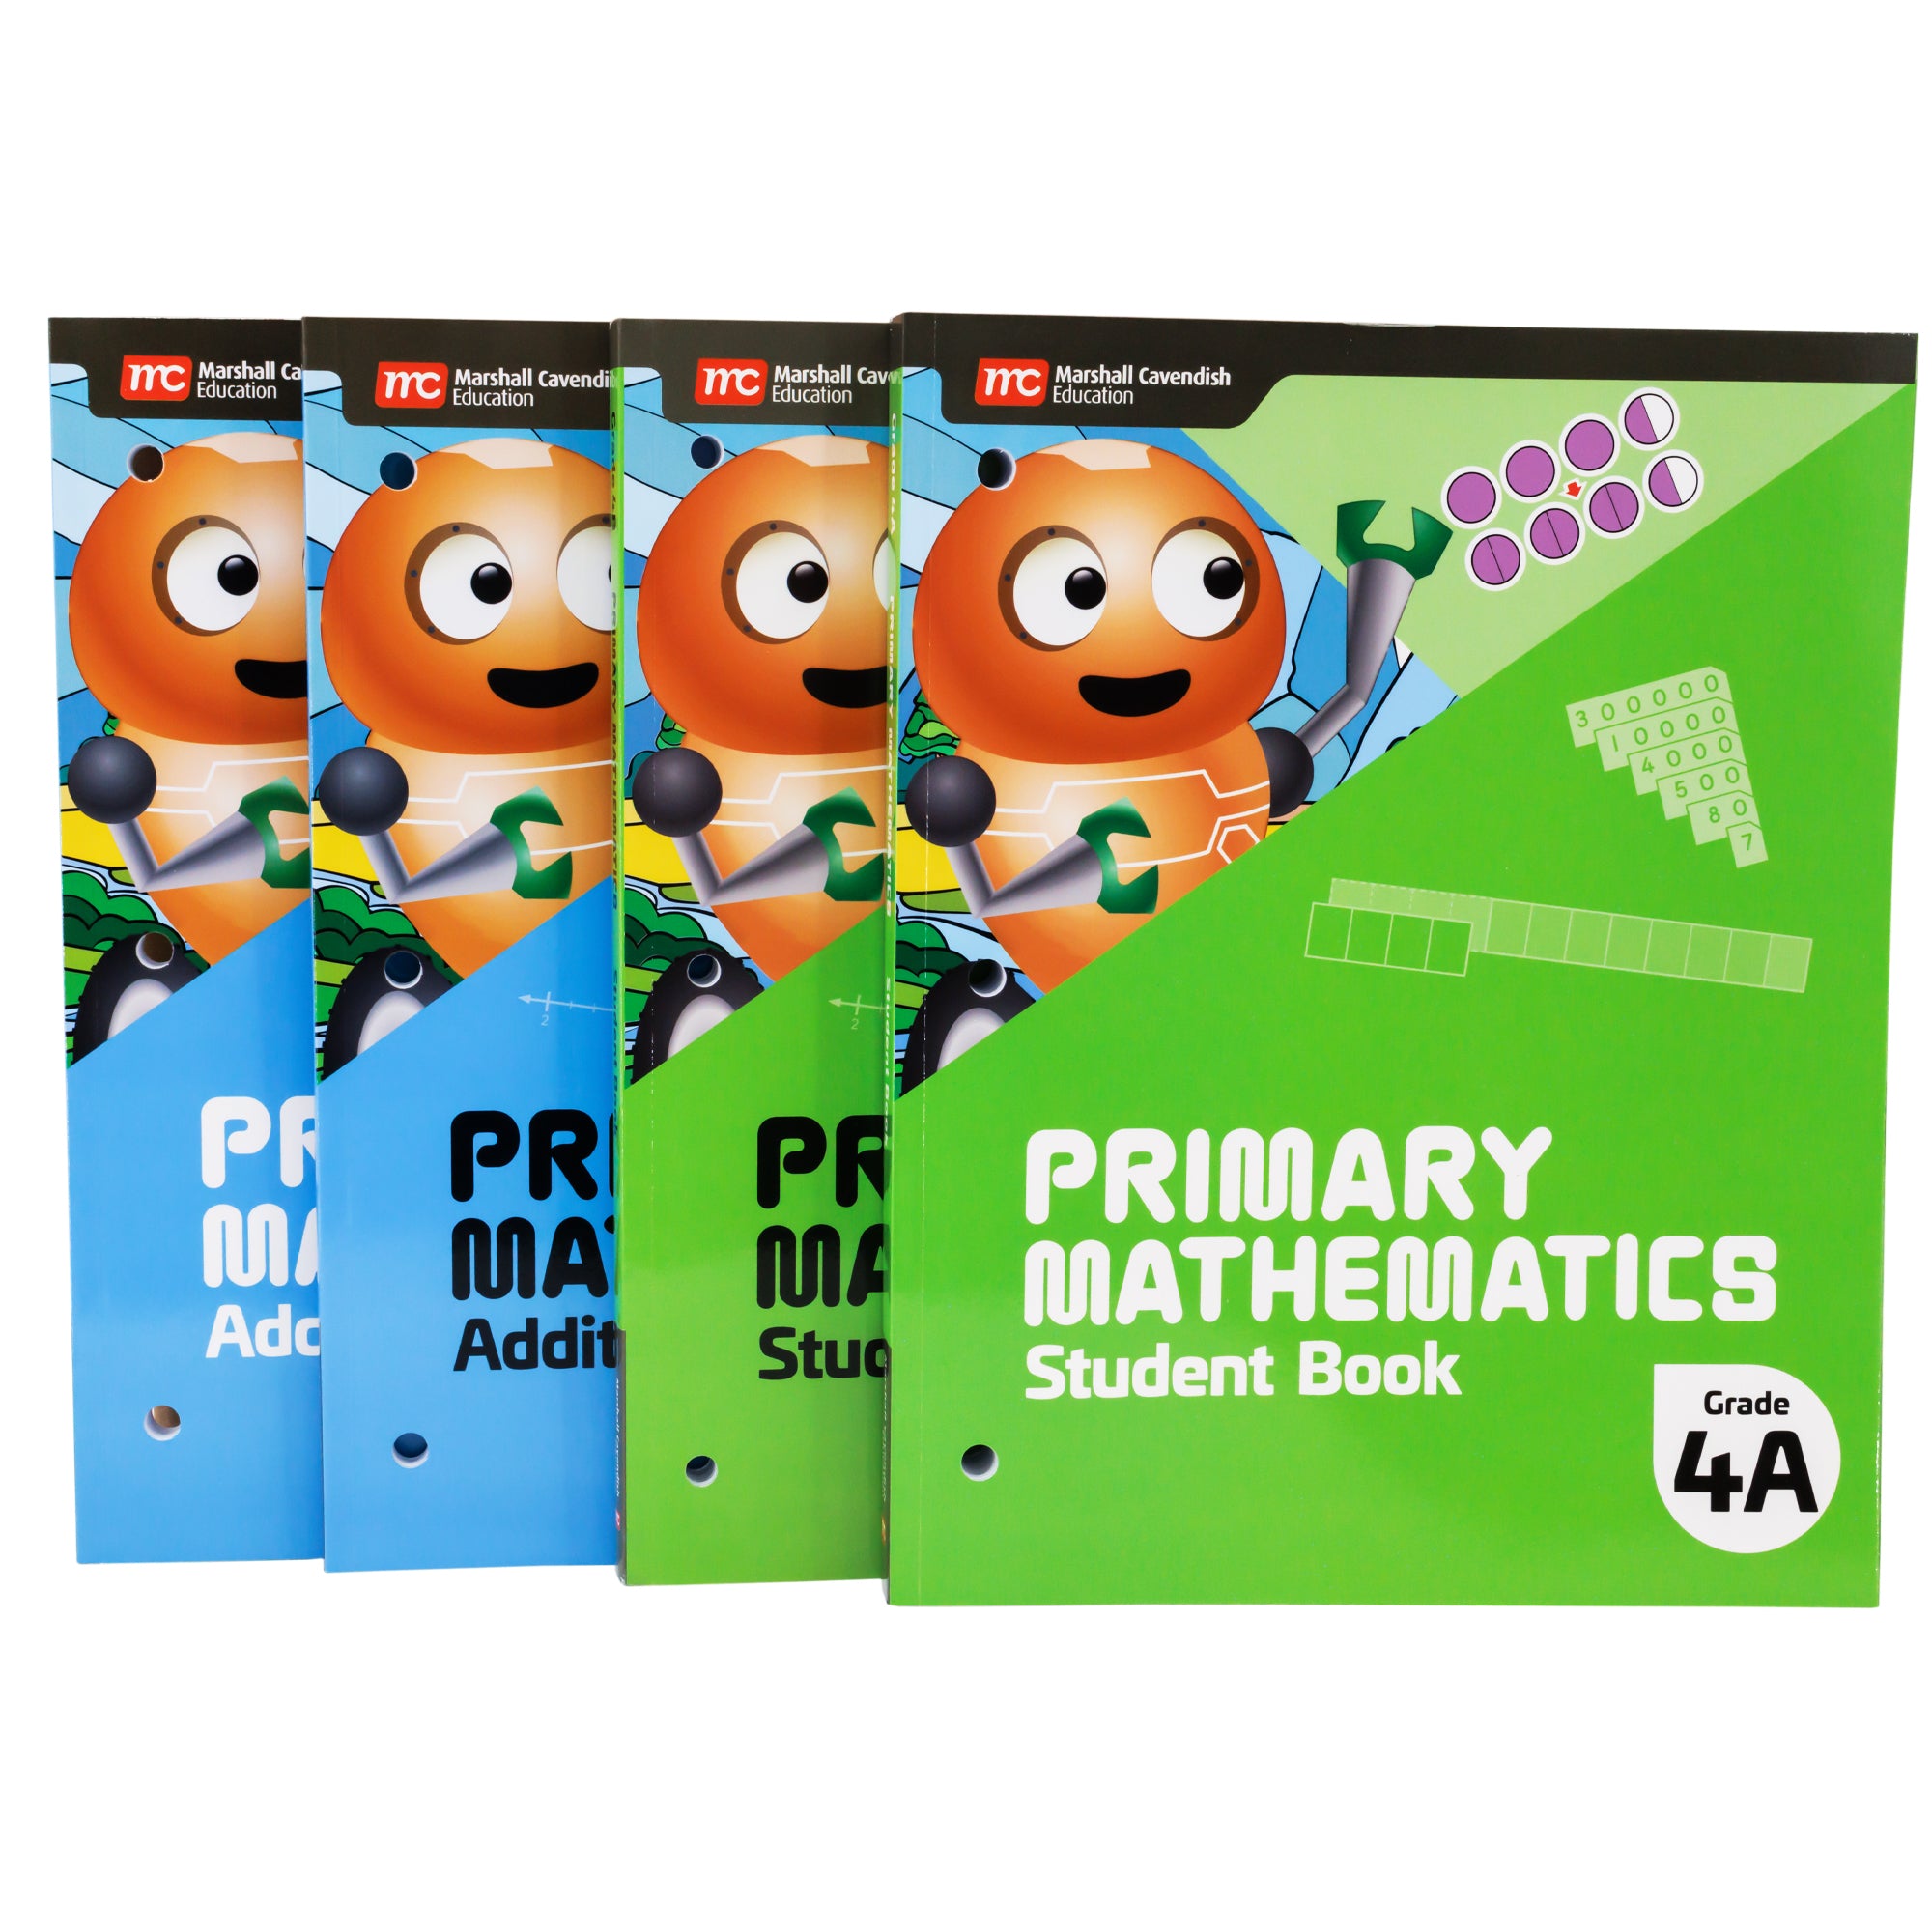 A row of 4 Singapore Primary Math fourth grade books. All books show a robot on the cover with a blue background on the 2 left books and a green background on the 2 right books.